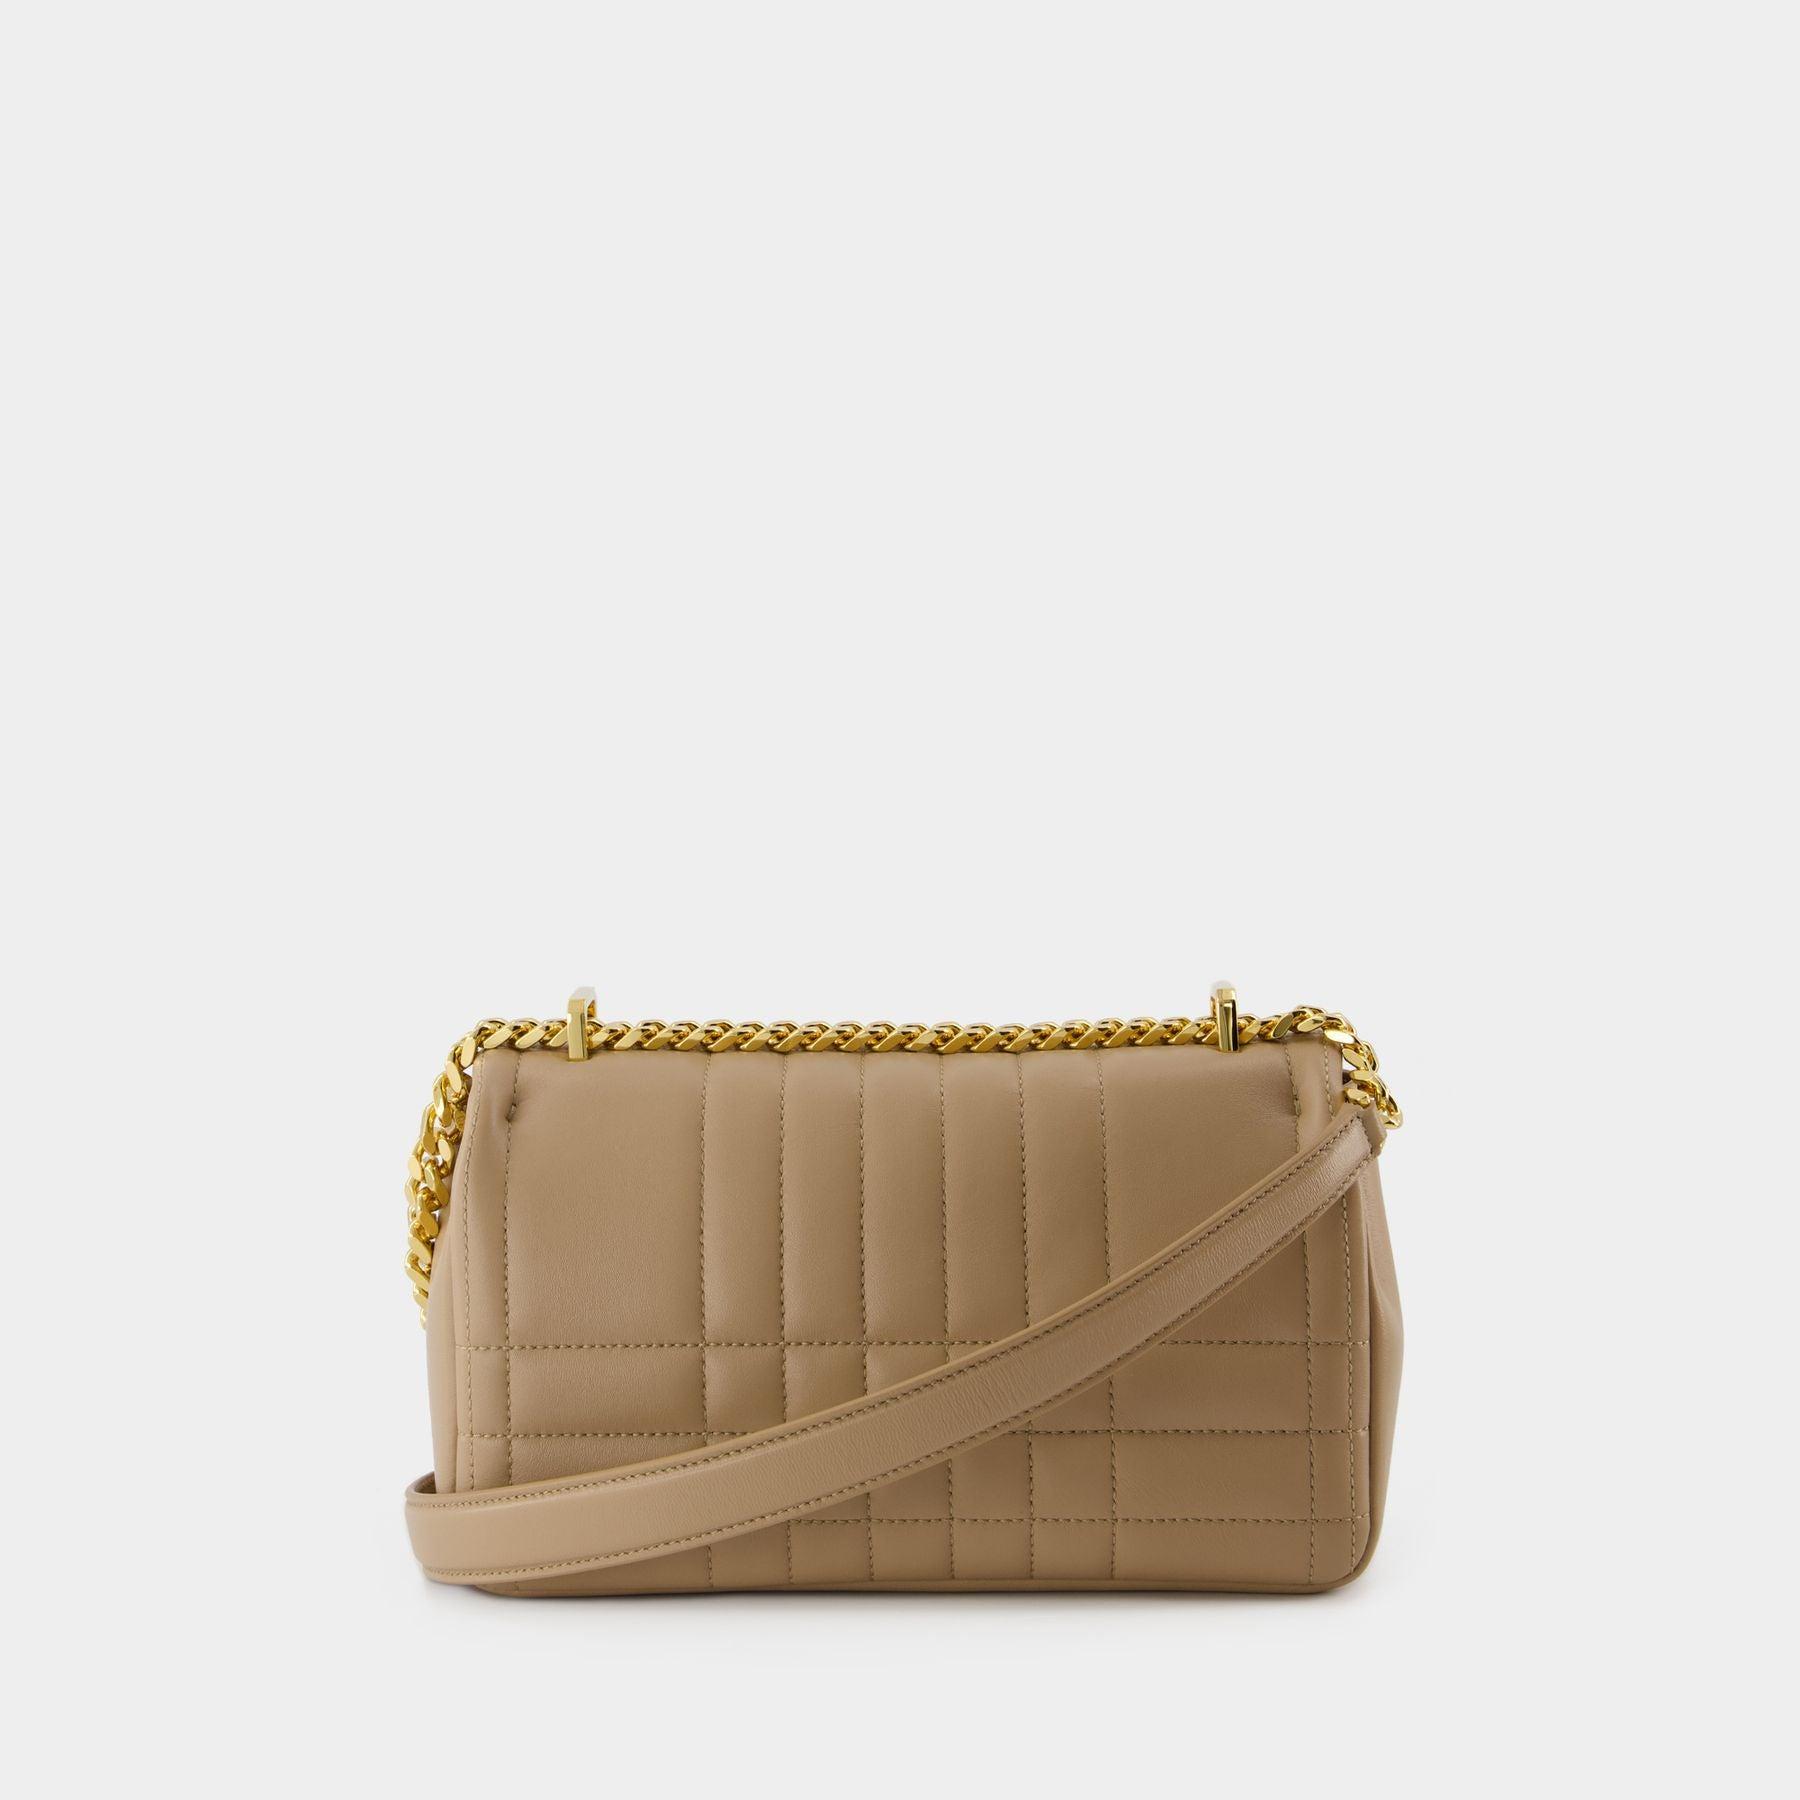 Burberry Lola Crossbody Bag - - Leather - Beige in Natural | Lyst